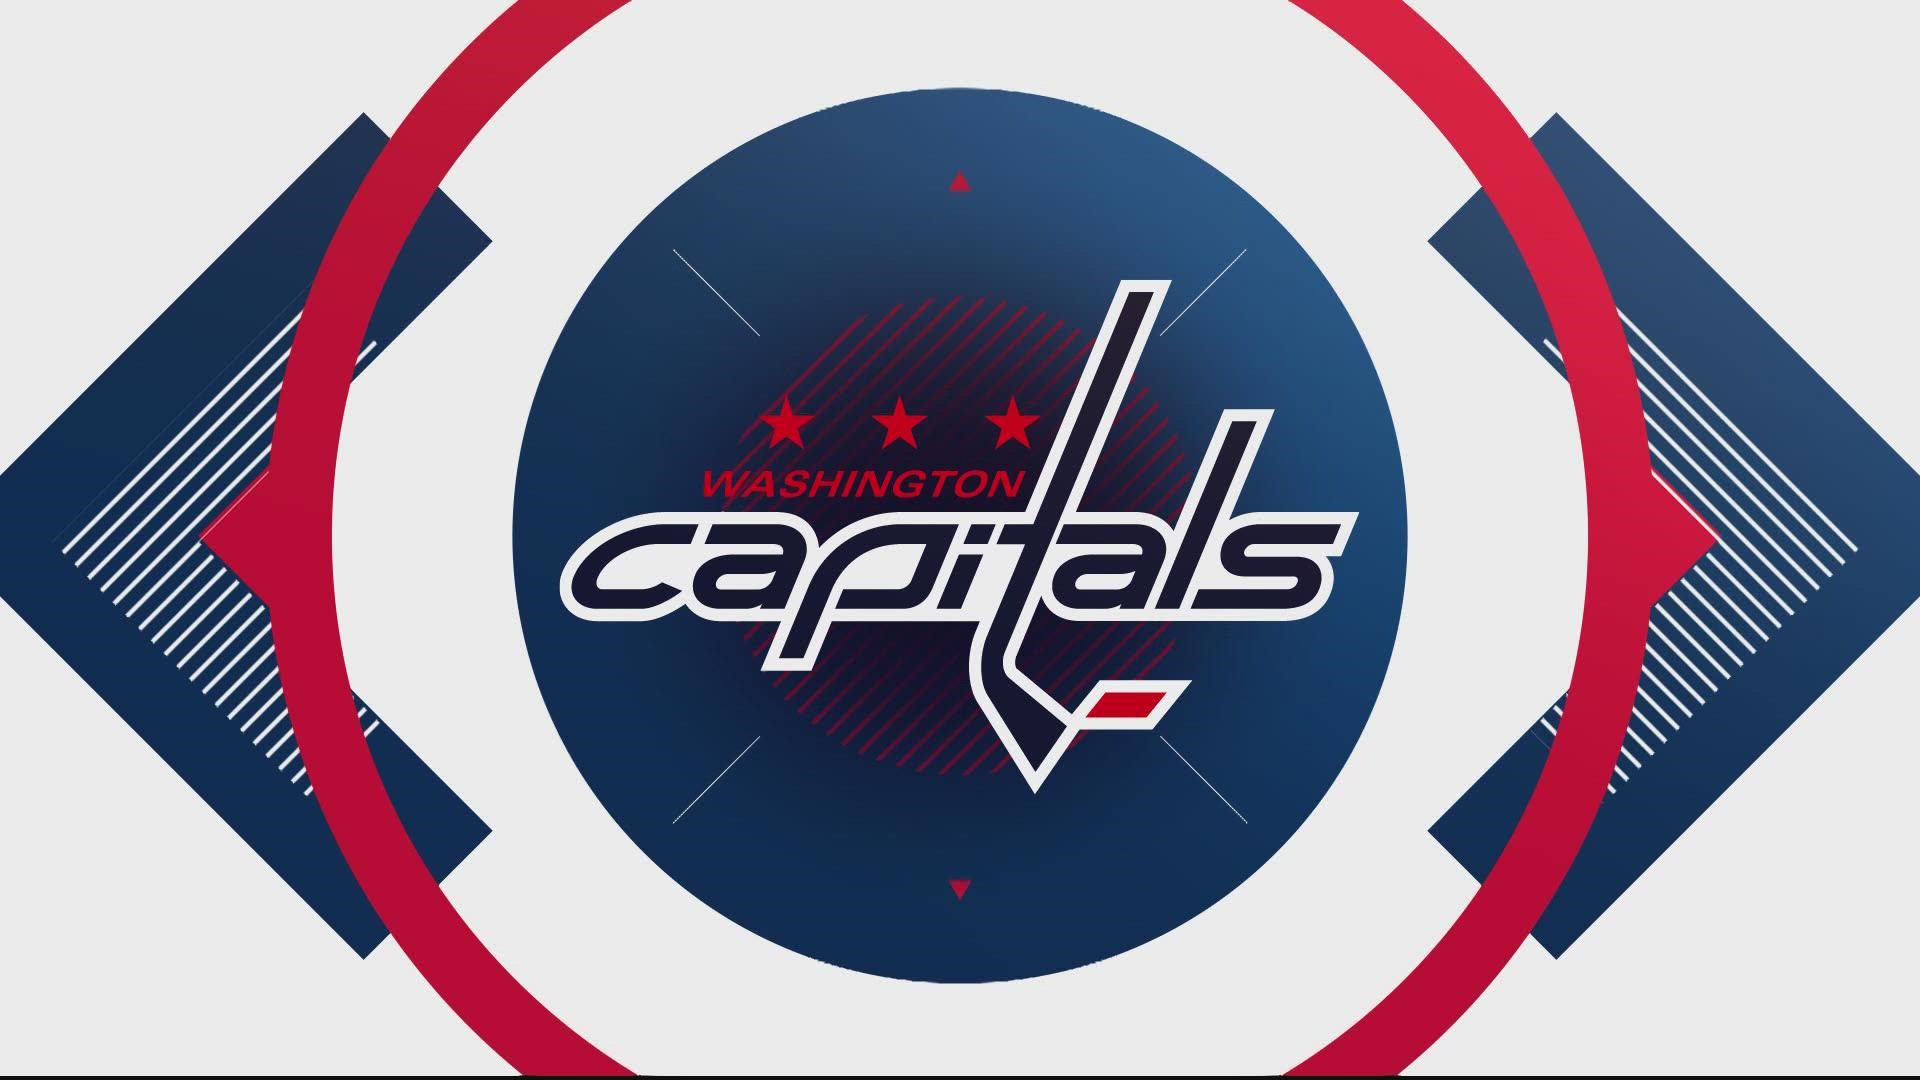 The Capitals will open the season Wednesday without Hagelin, center Nicklas Backstrom and right winger Tom Wilson. Backstrom is also out indefinitely after surgery.